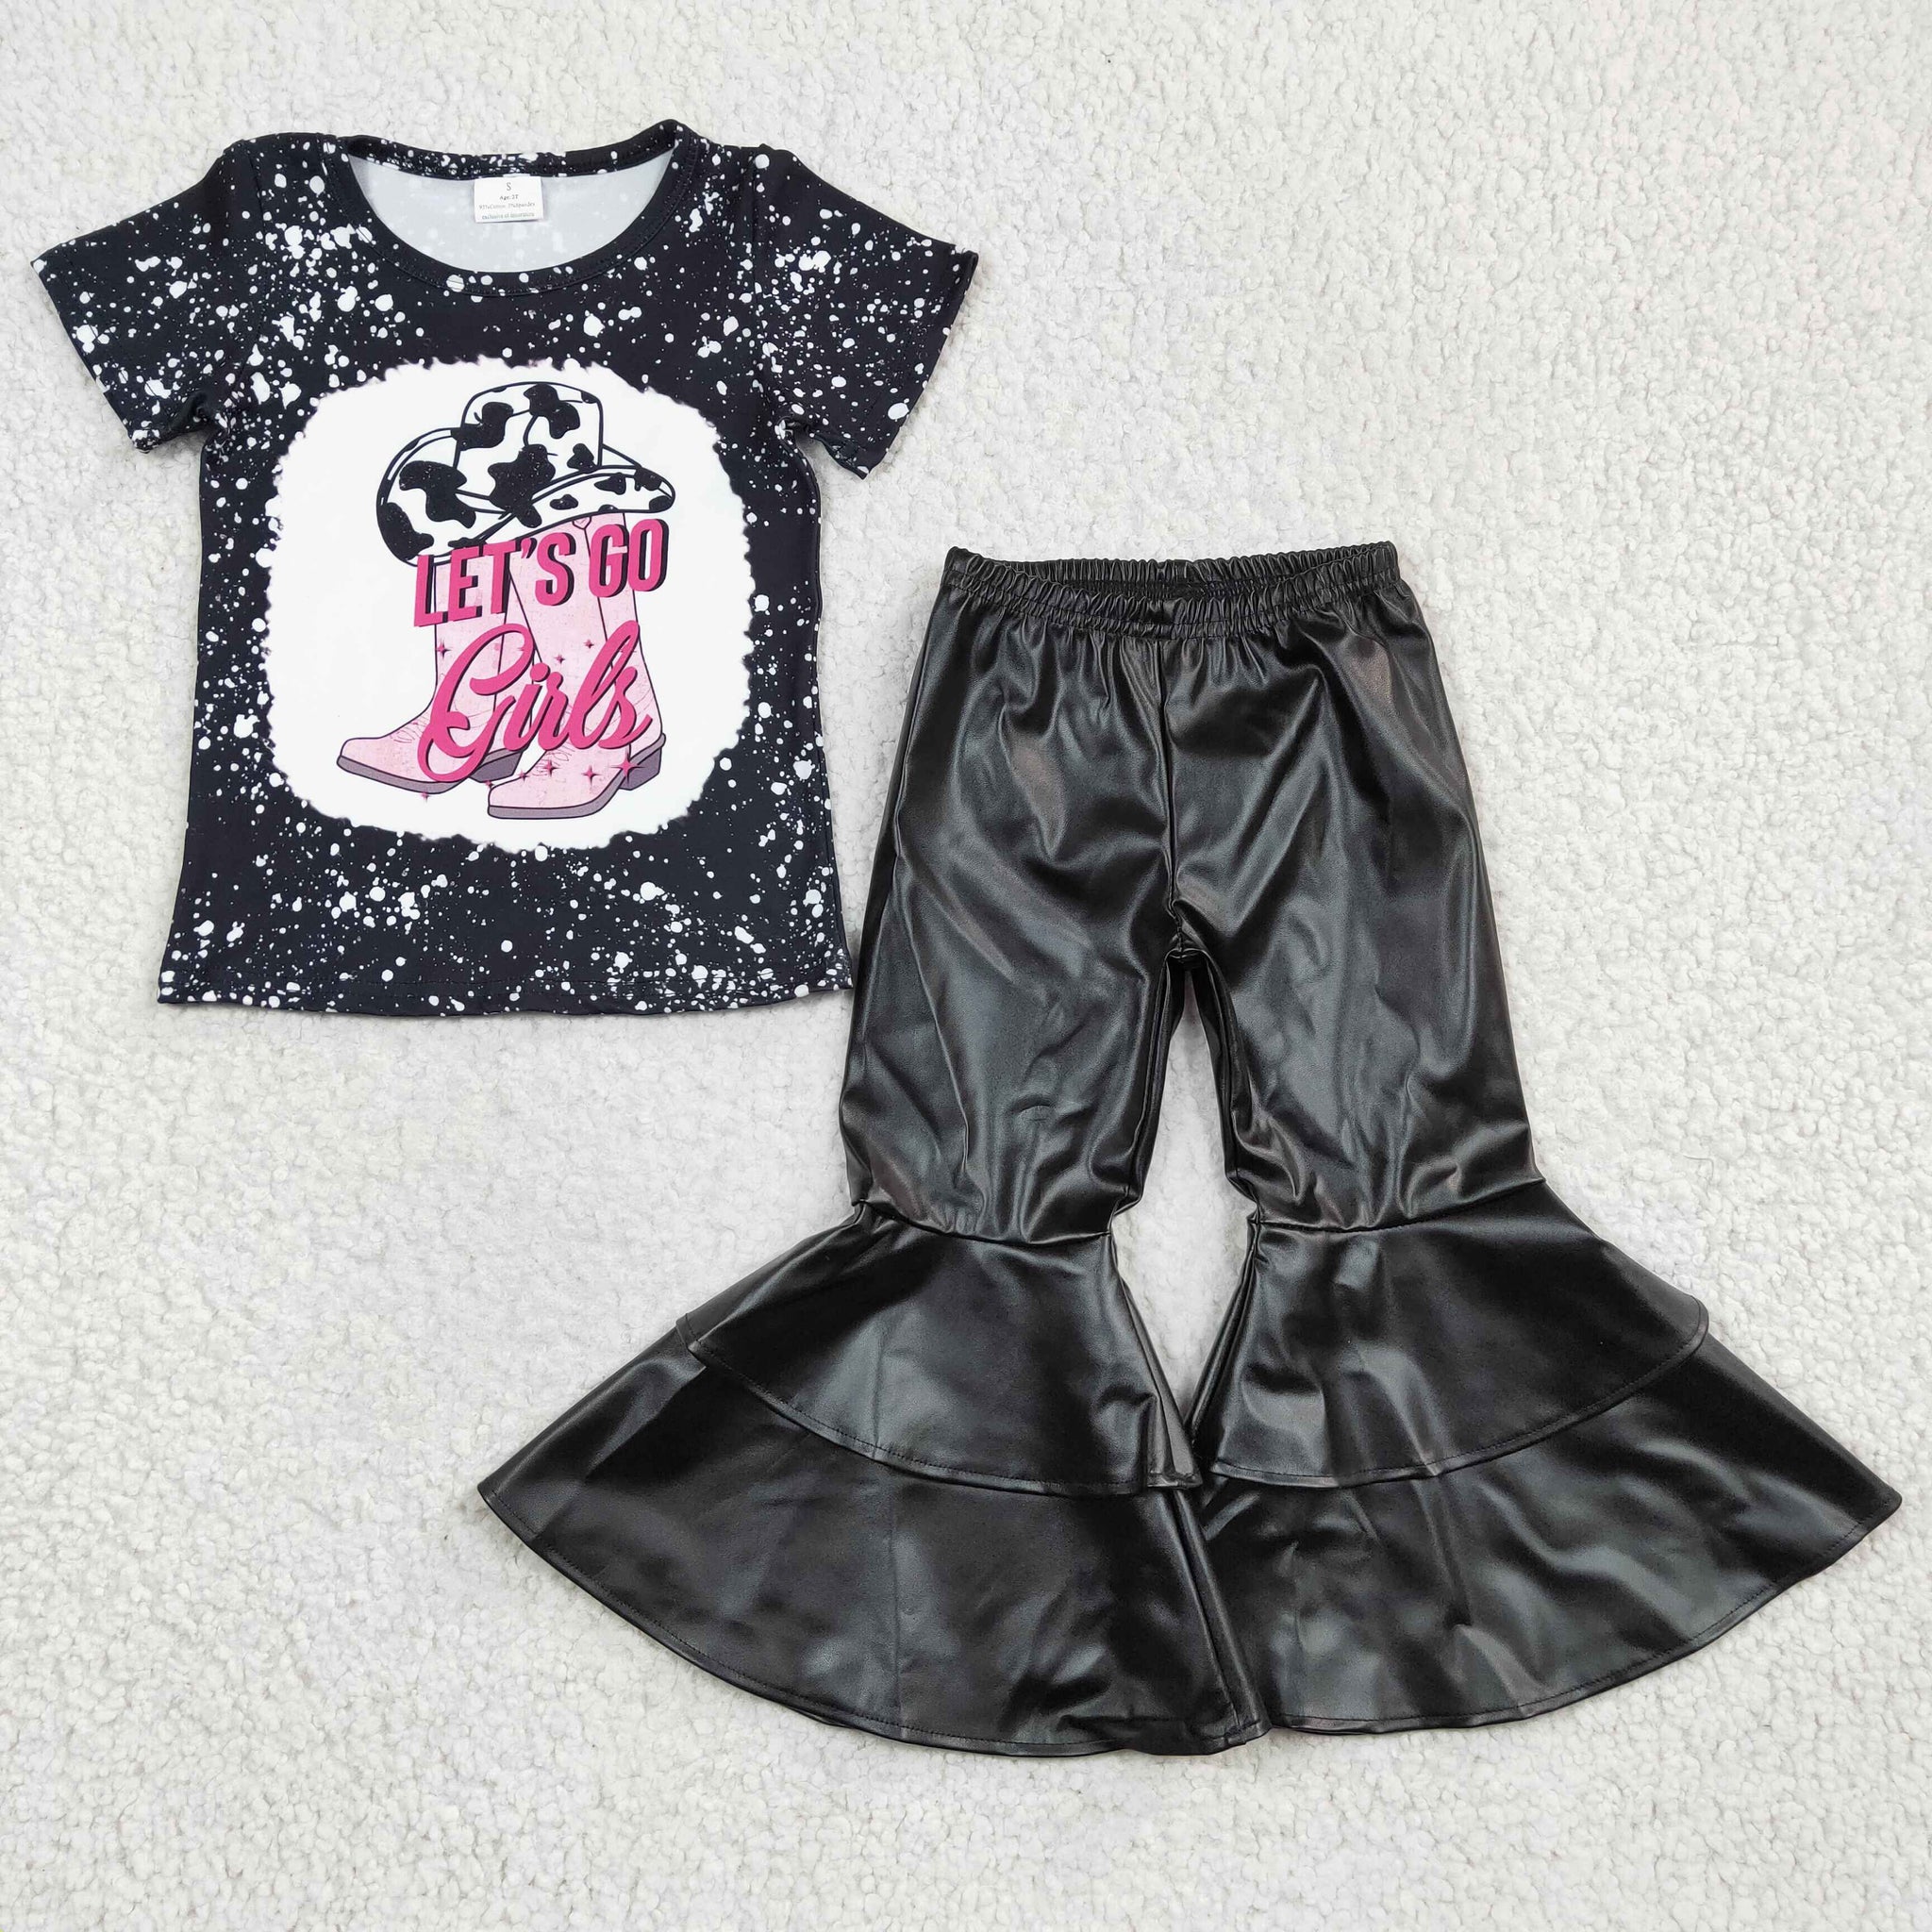 GSPO0498 kids clothes girls let's go girls shoes fall spring outfits (leather pants set)